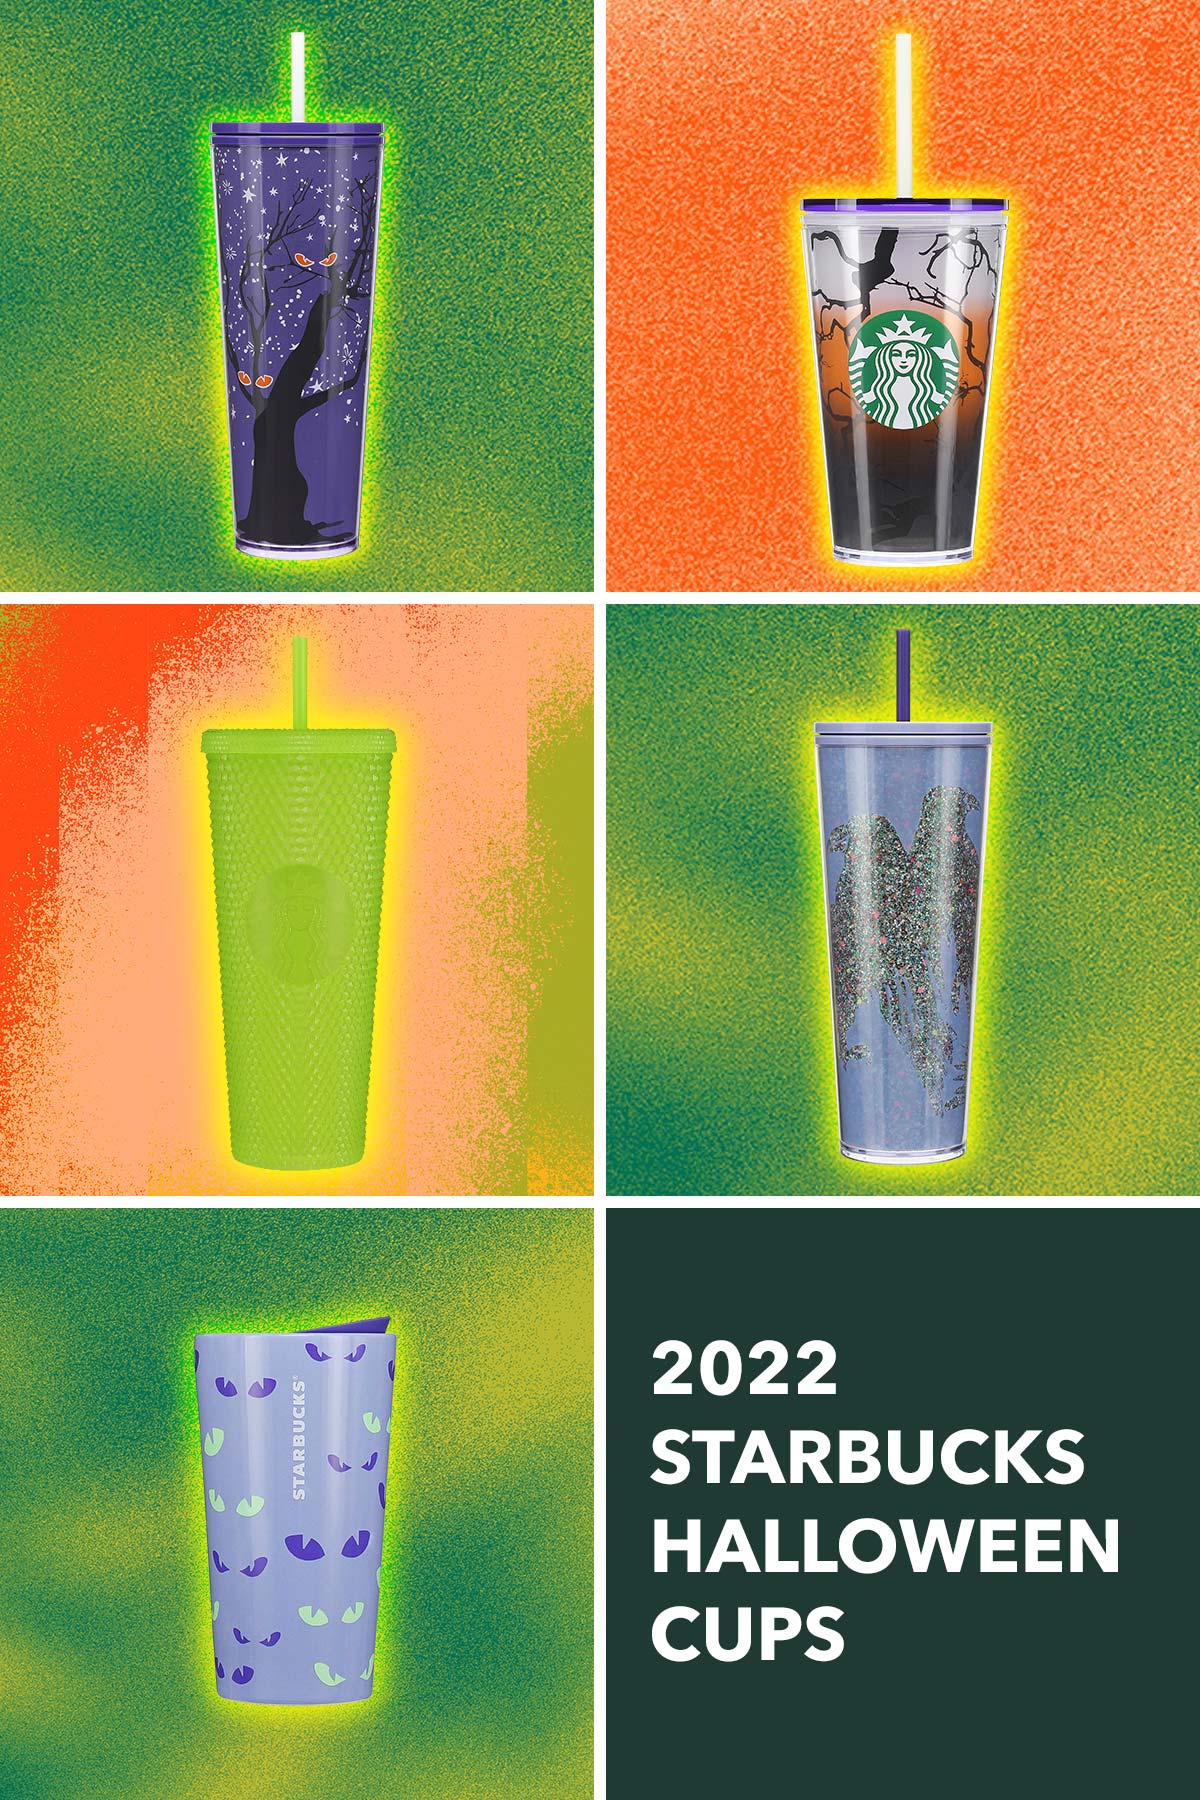 NEW Starbucks Glow-in-the Dark Cold Cup Key Chain Set of 3